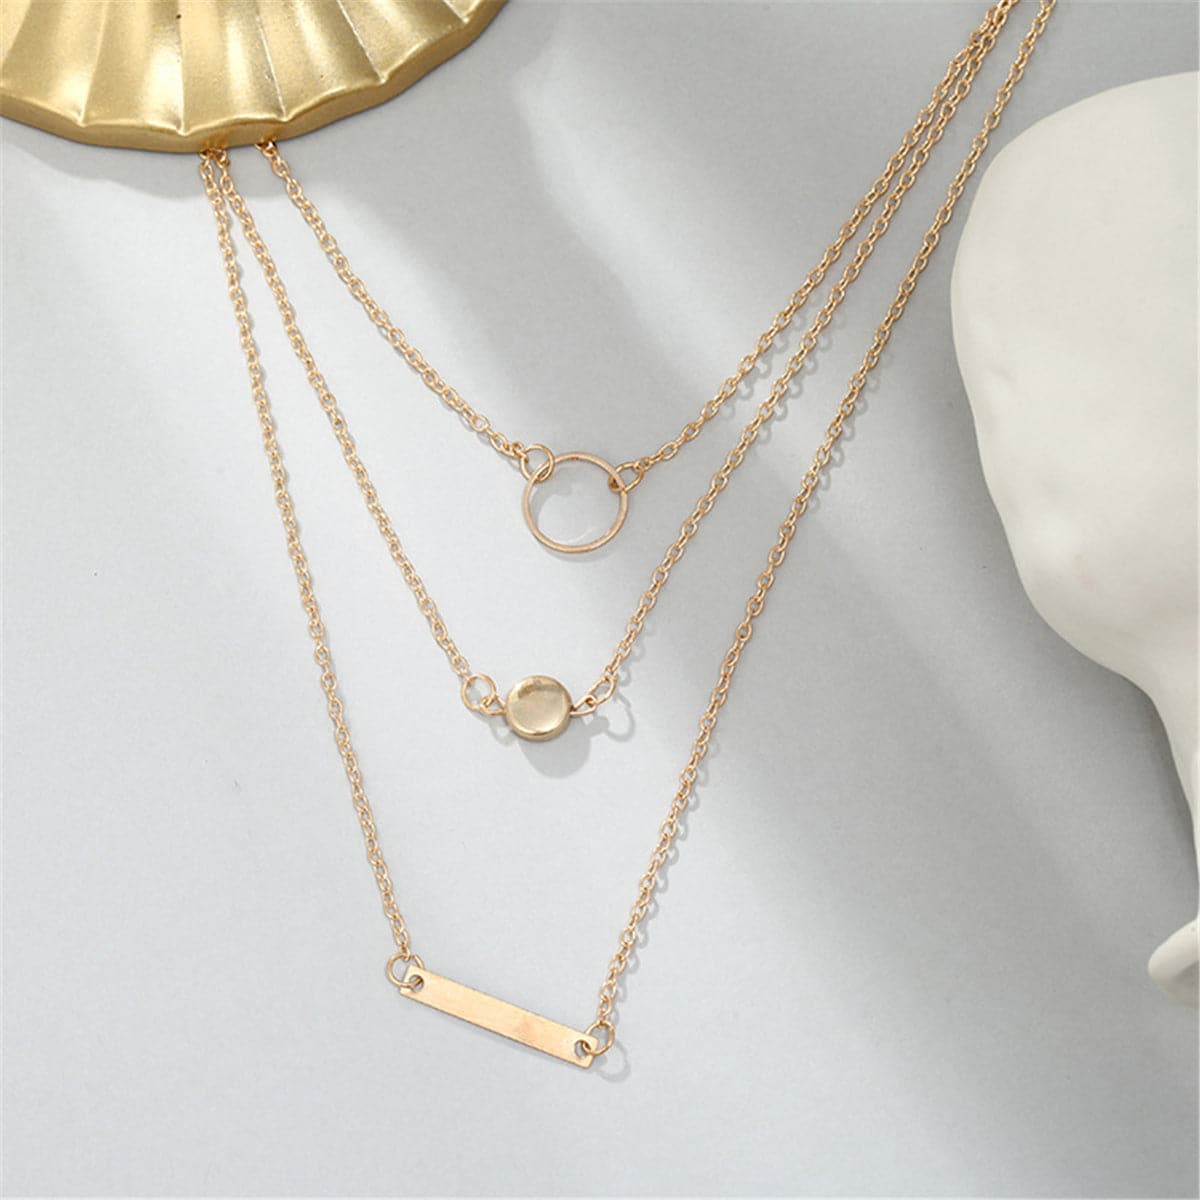 18K Gold-Plated Ring & Bar Layered Pendant Necklace